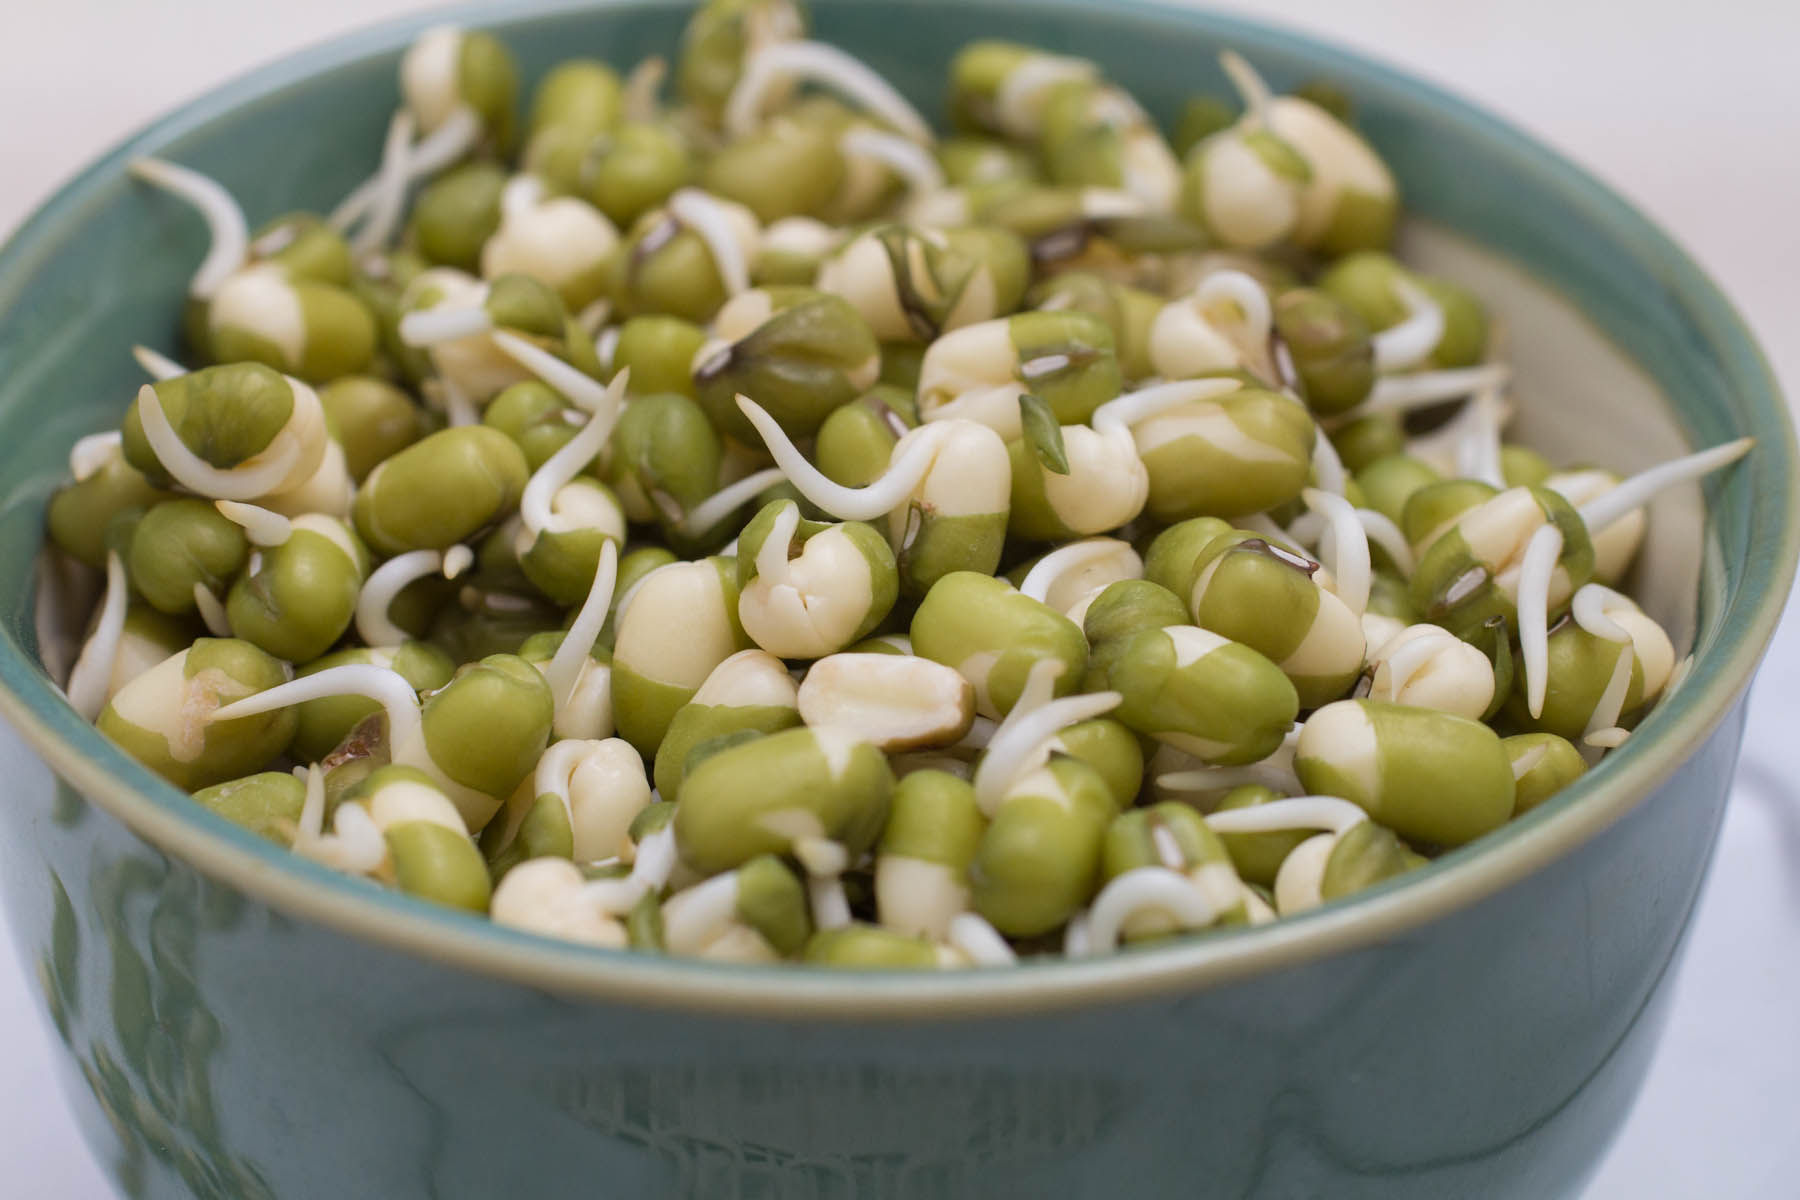 Nutritional value and properties of mung bean sprouts for health and beauty